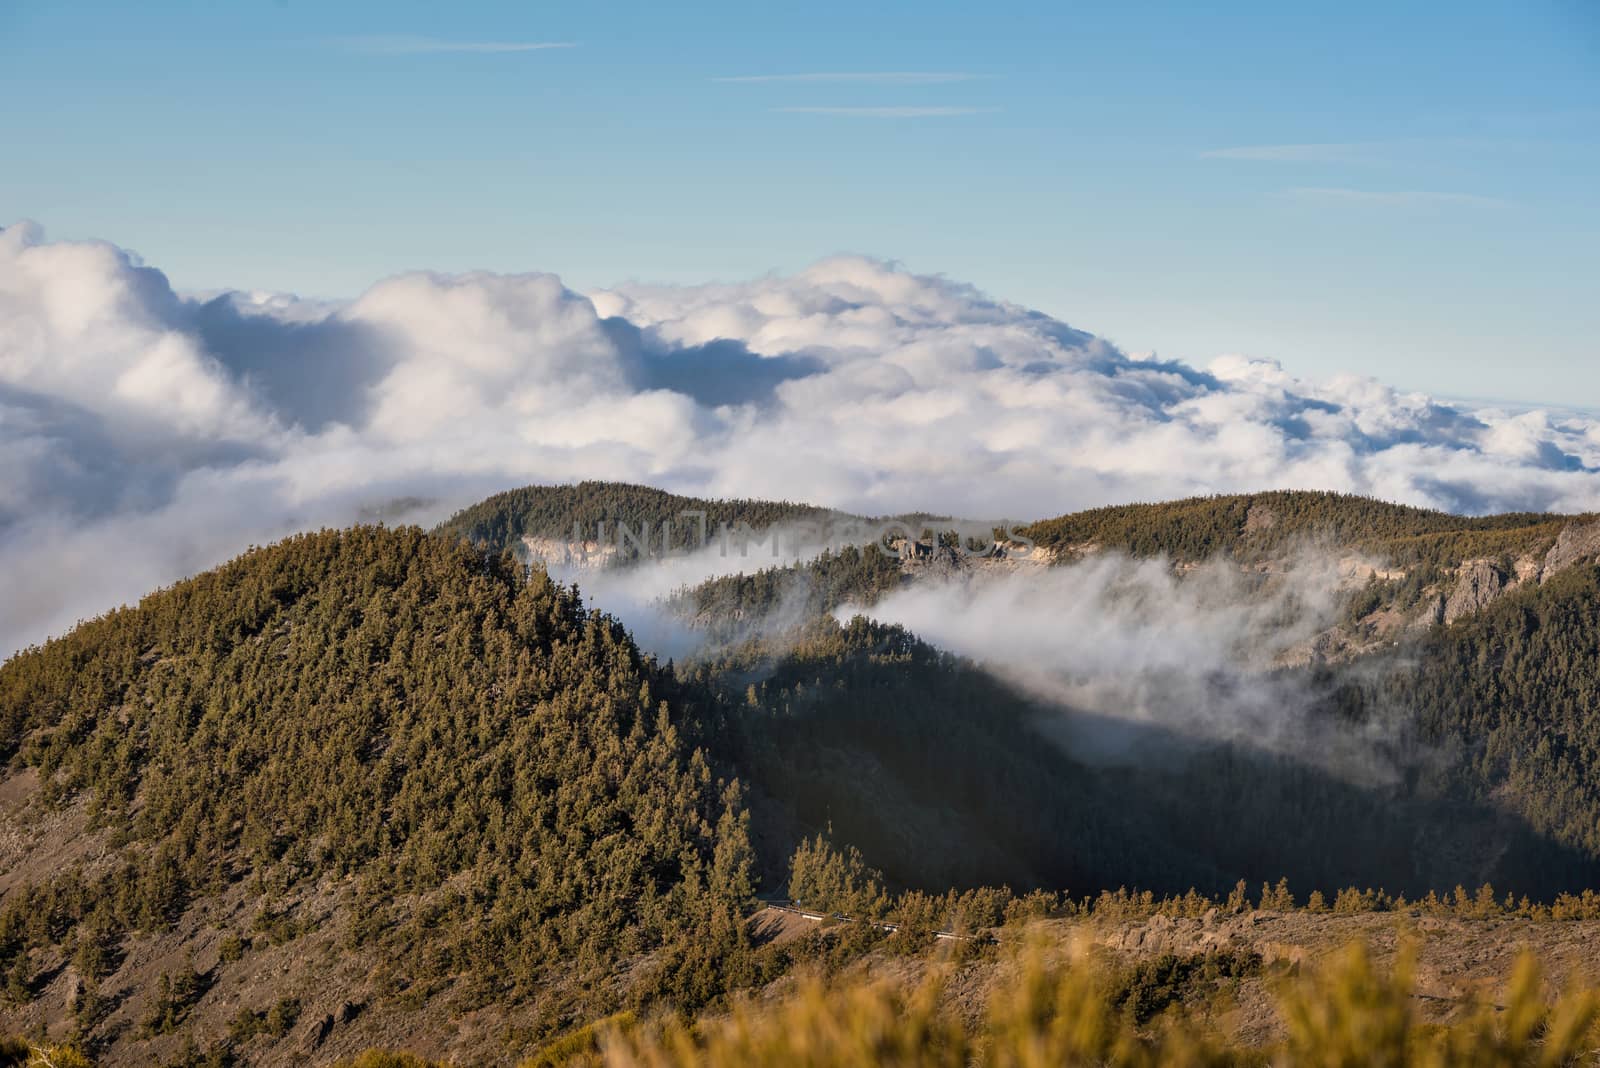 Sea of clouds in volcanic landscape of Teide national park, Tenerife, Canary islands, Spain.